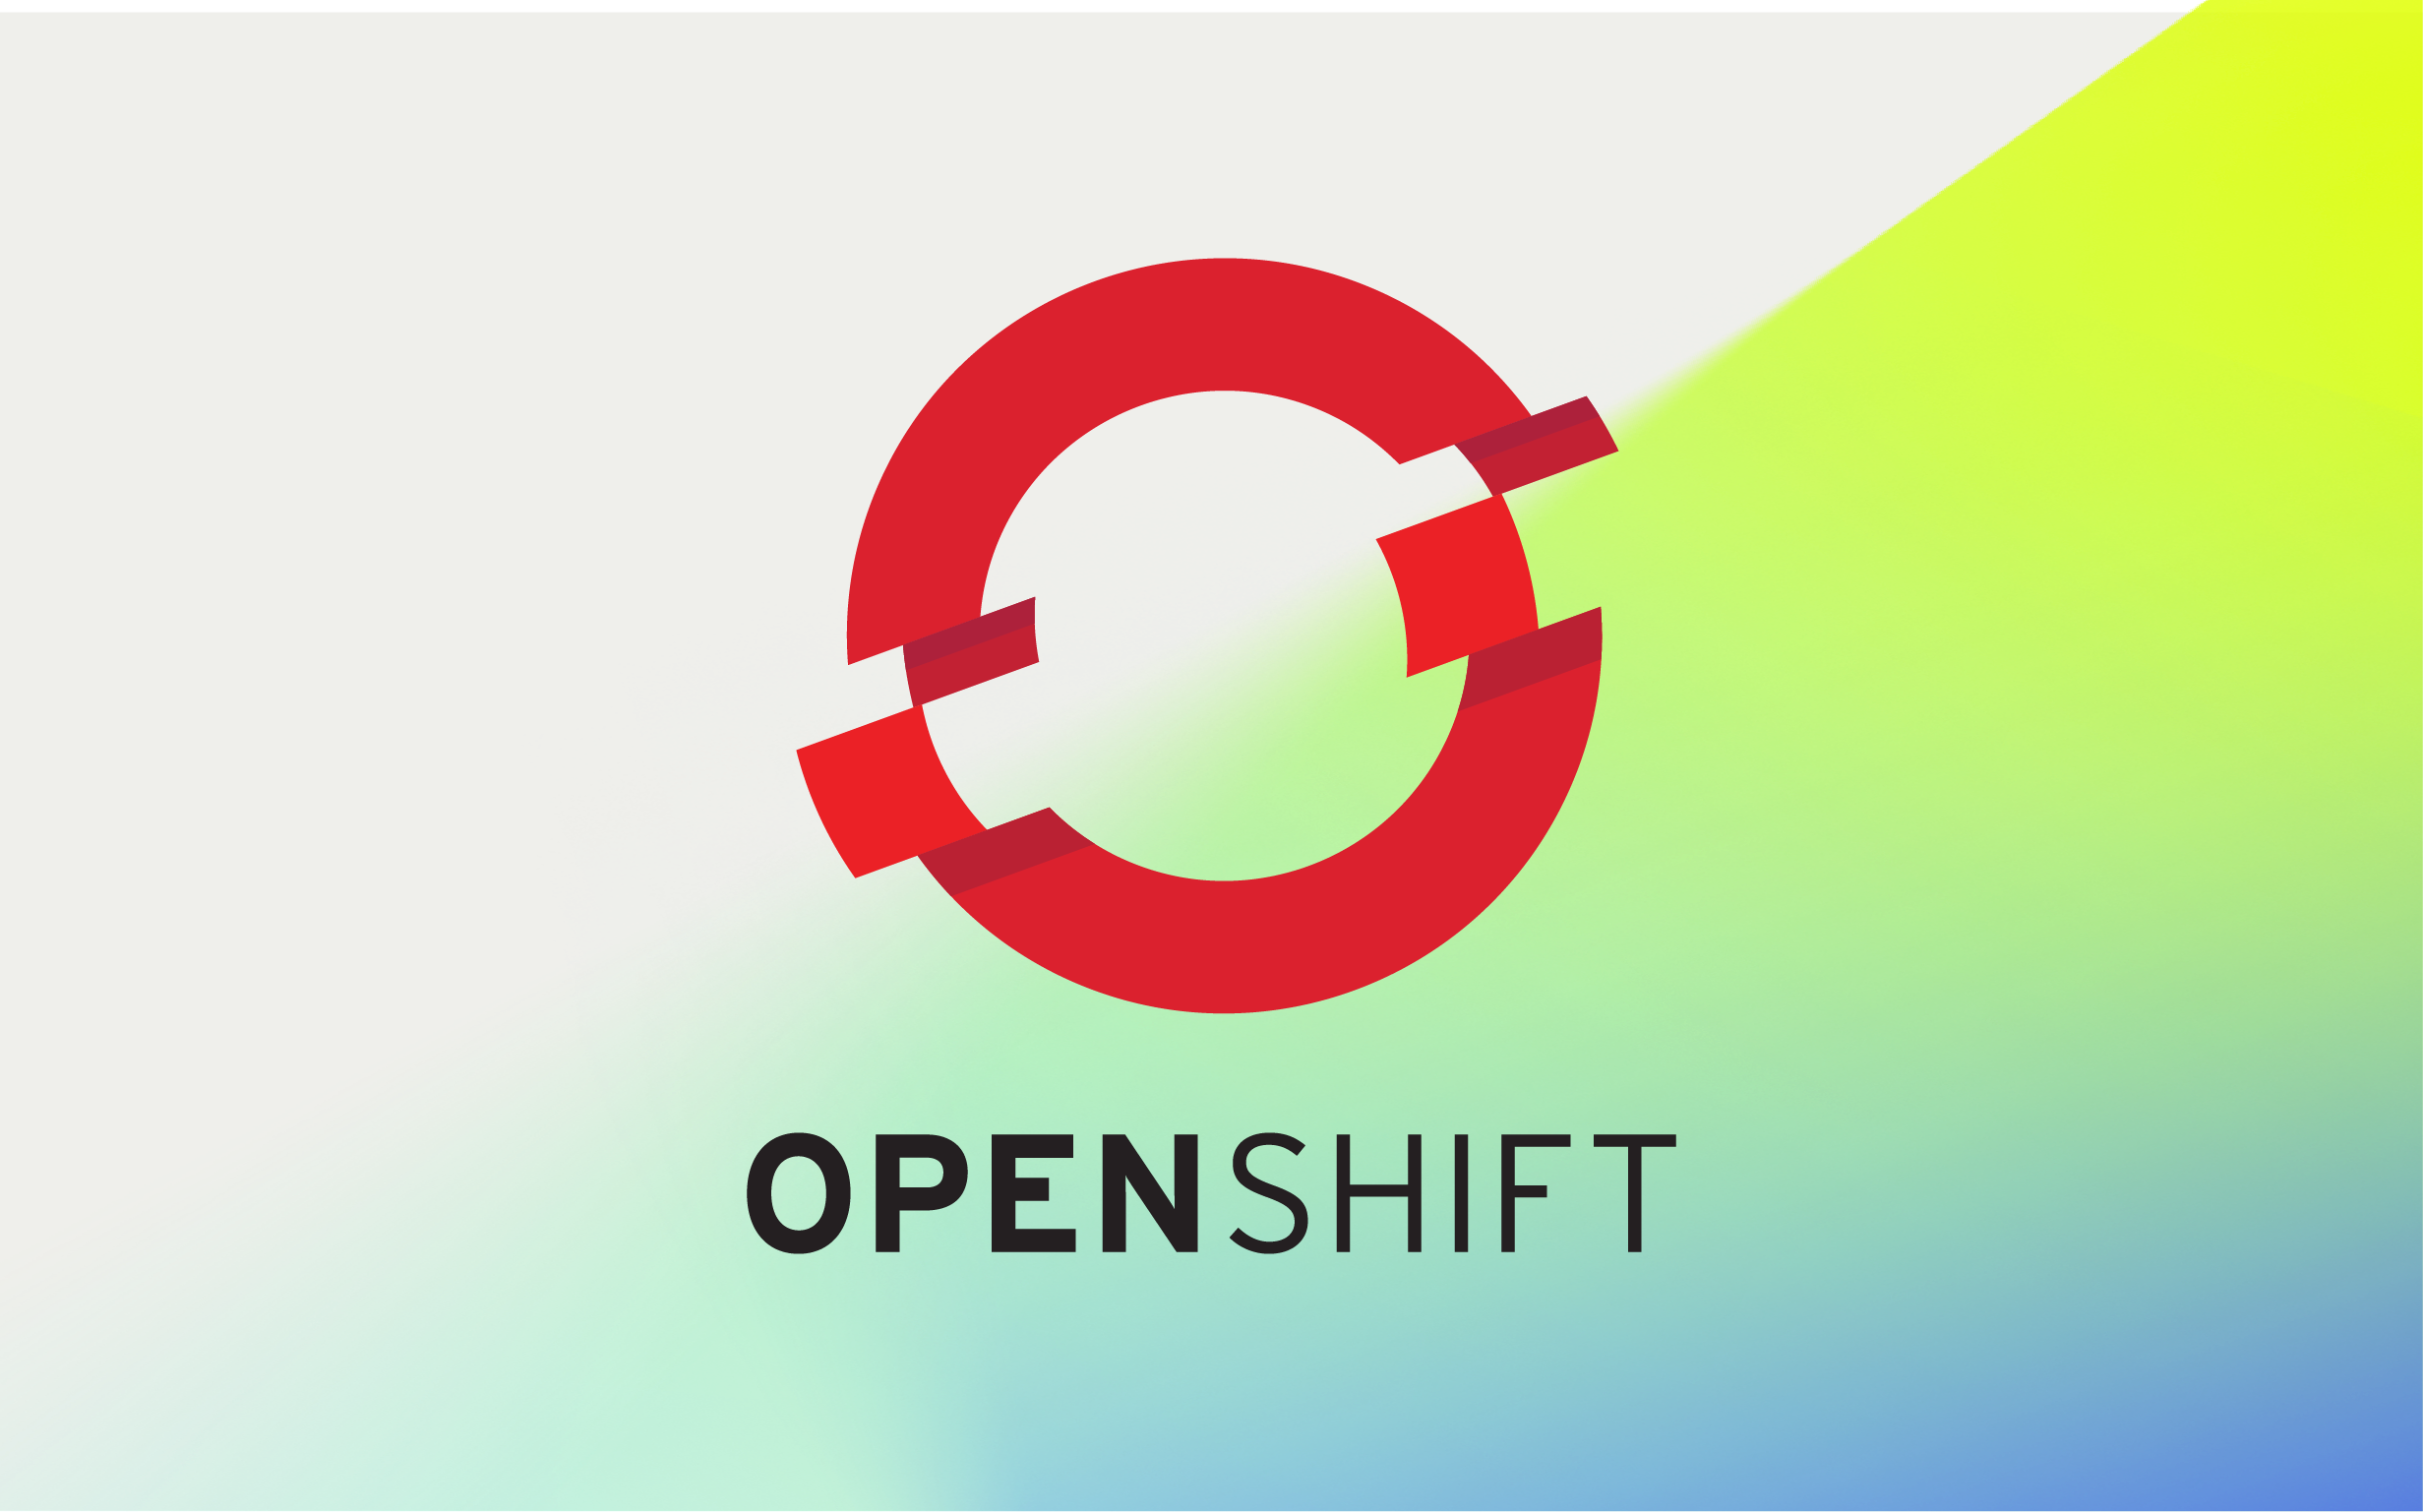 What Is OpenShift?